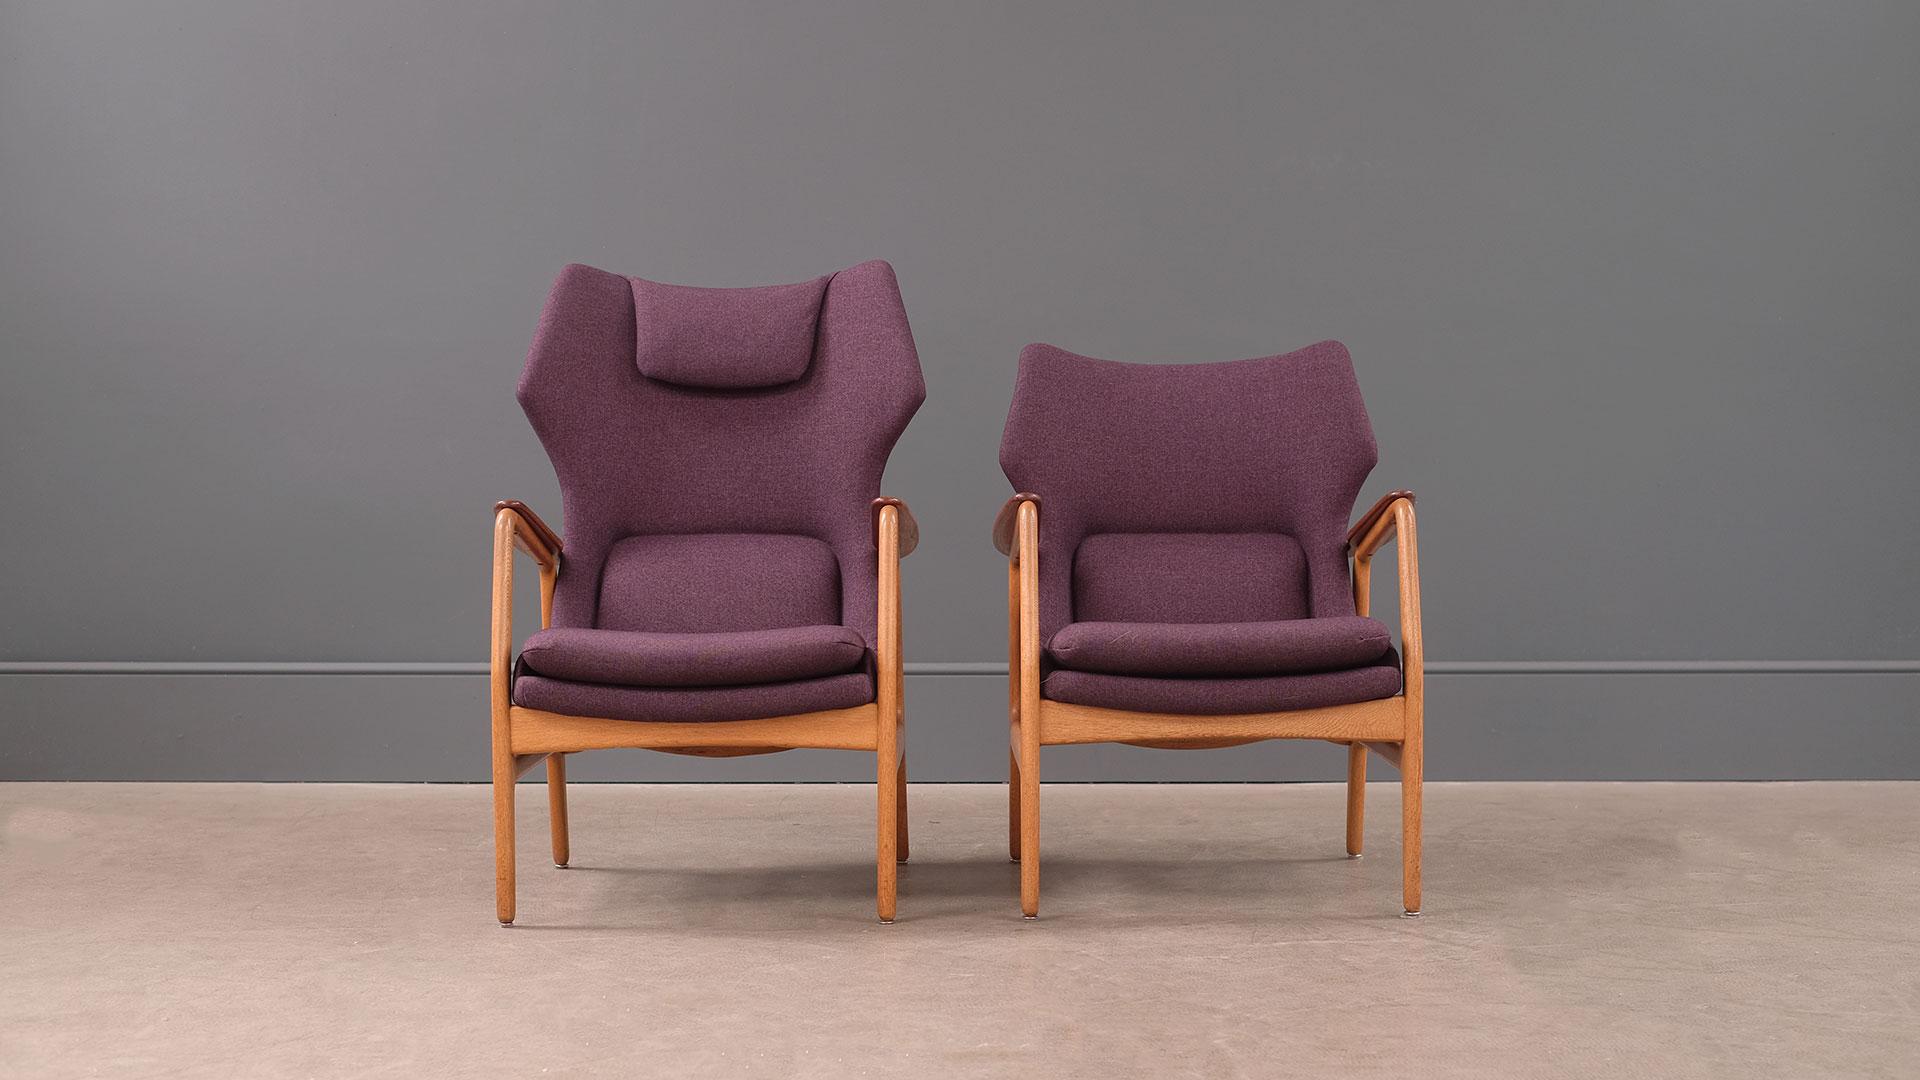 Beautiful pair of lounge chairs in solid oak with contrasting teak back rail designed in Denmark by Aksel Bender Madsen for Bovenkamp. Super fine pair in wonderful condition.